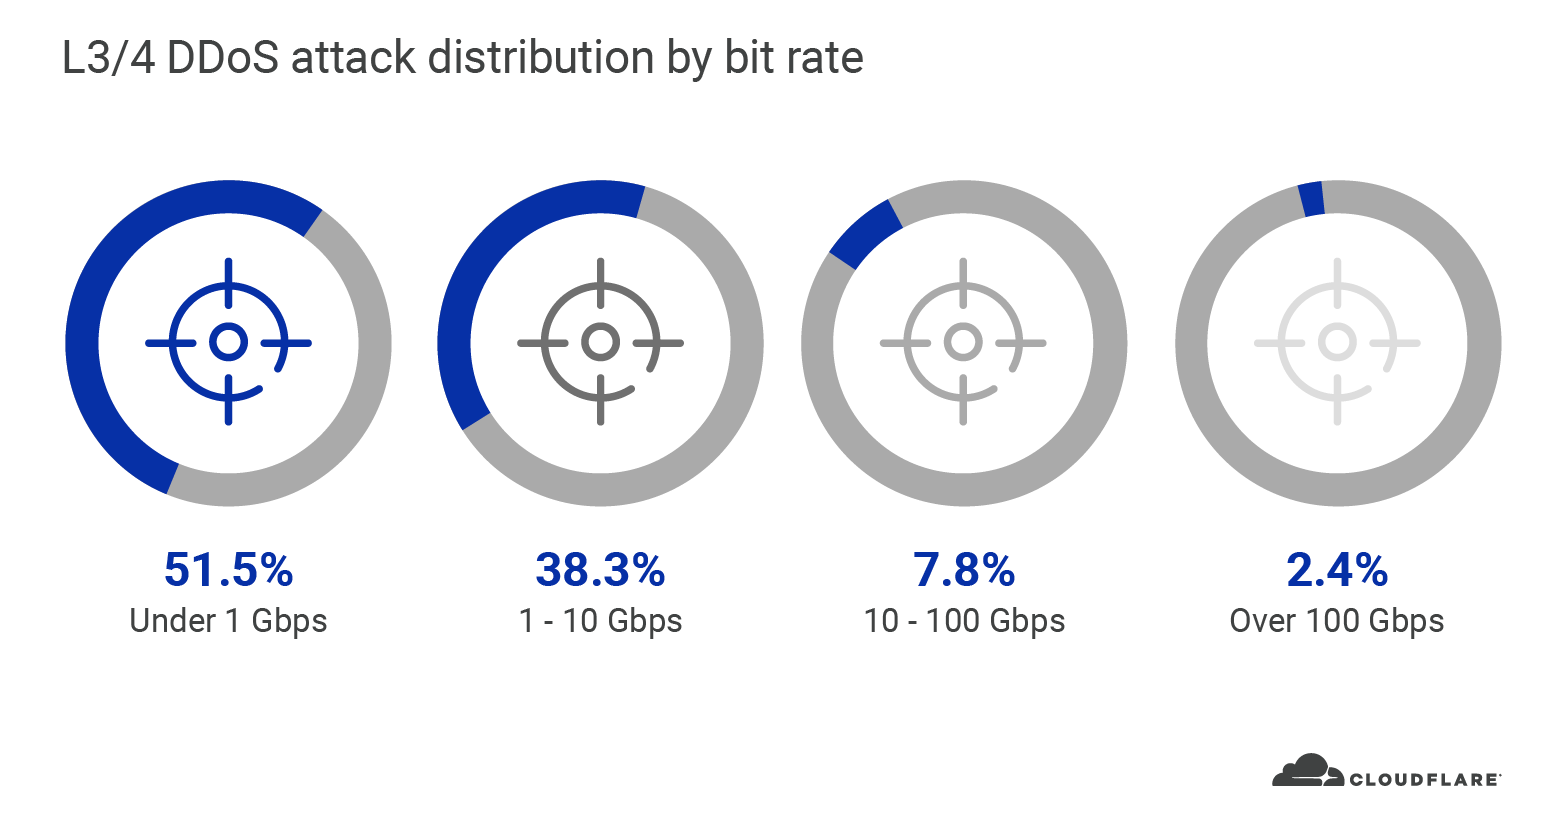 L3:4 DDos attack distribution by bit rate